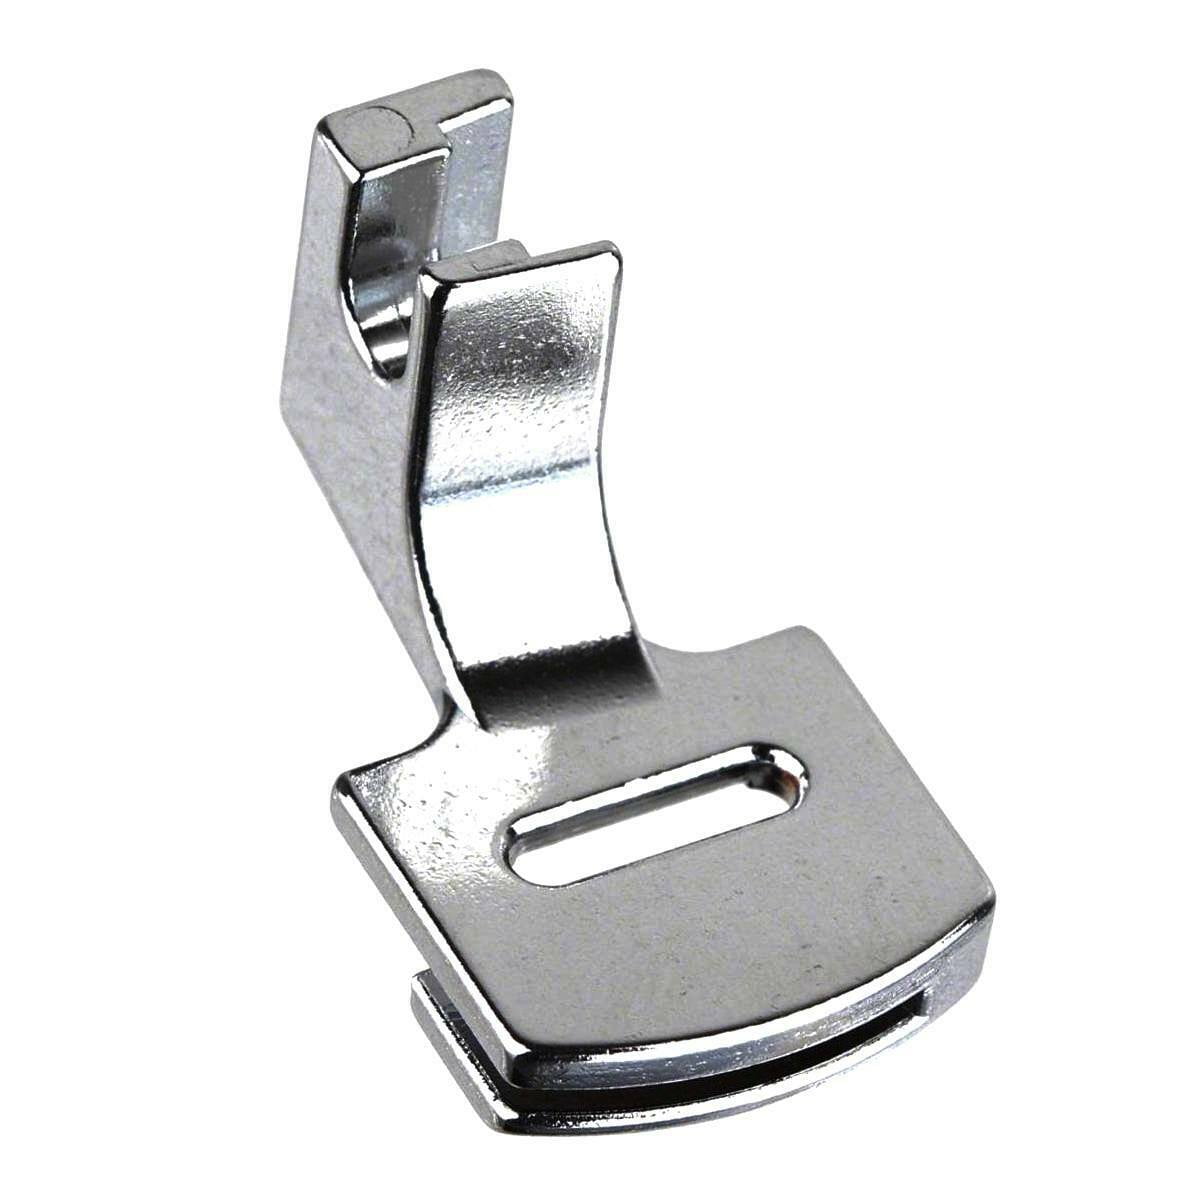 Low Shank Gathering Presser Foot #RJ-702 For Portable Home Sewing Machines 